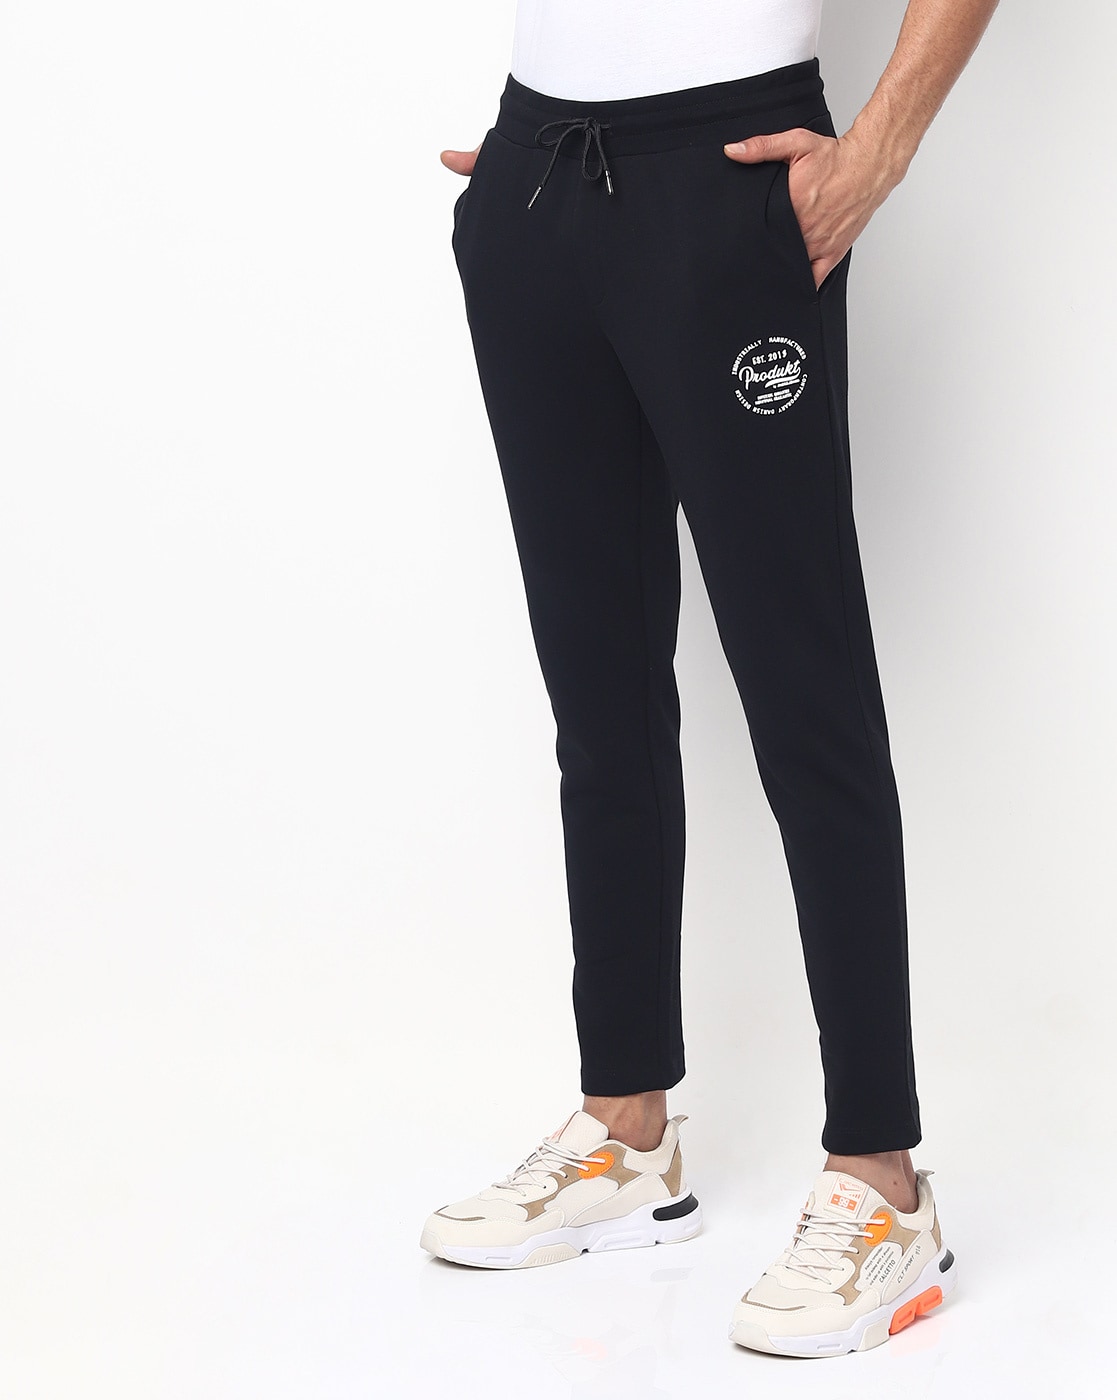 JACK & JONES kids' joggers & track pants, compare prices and buy online